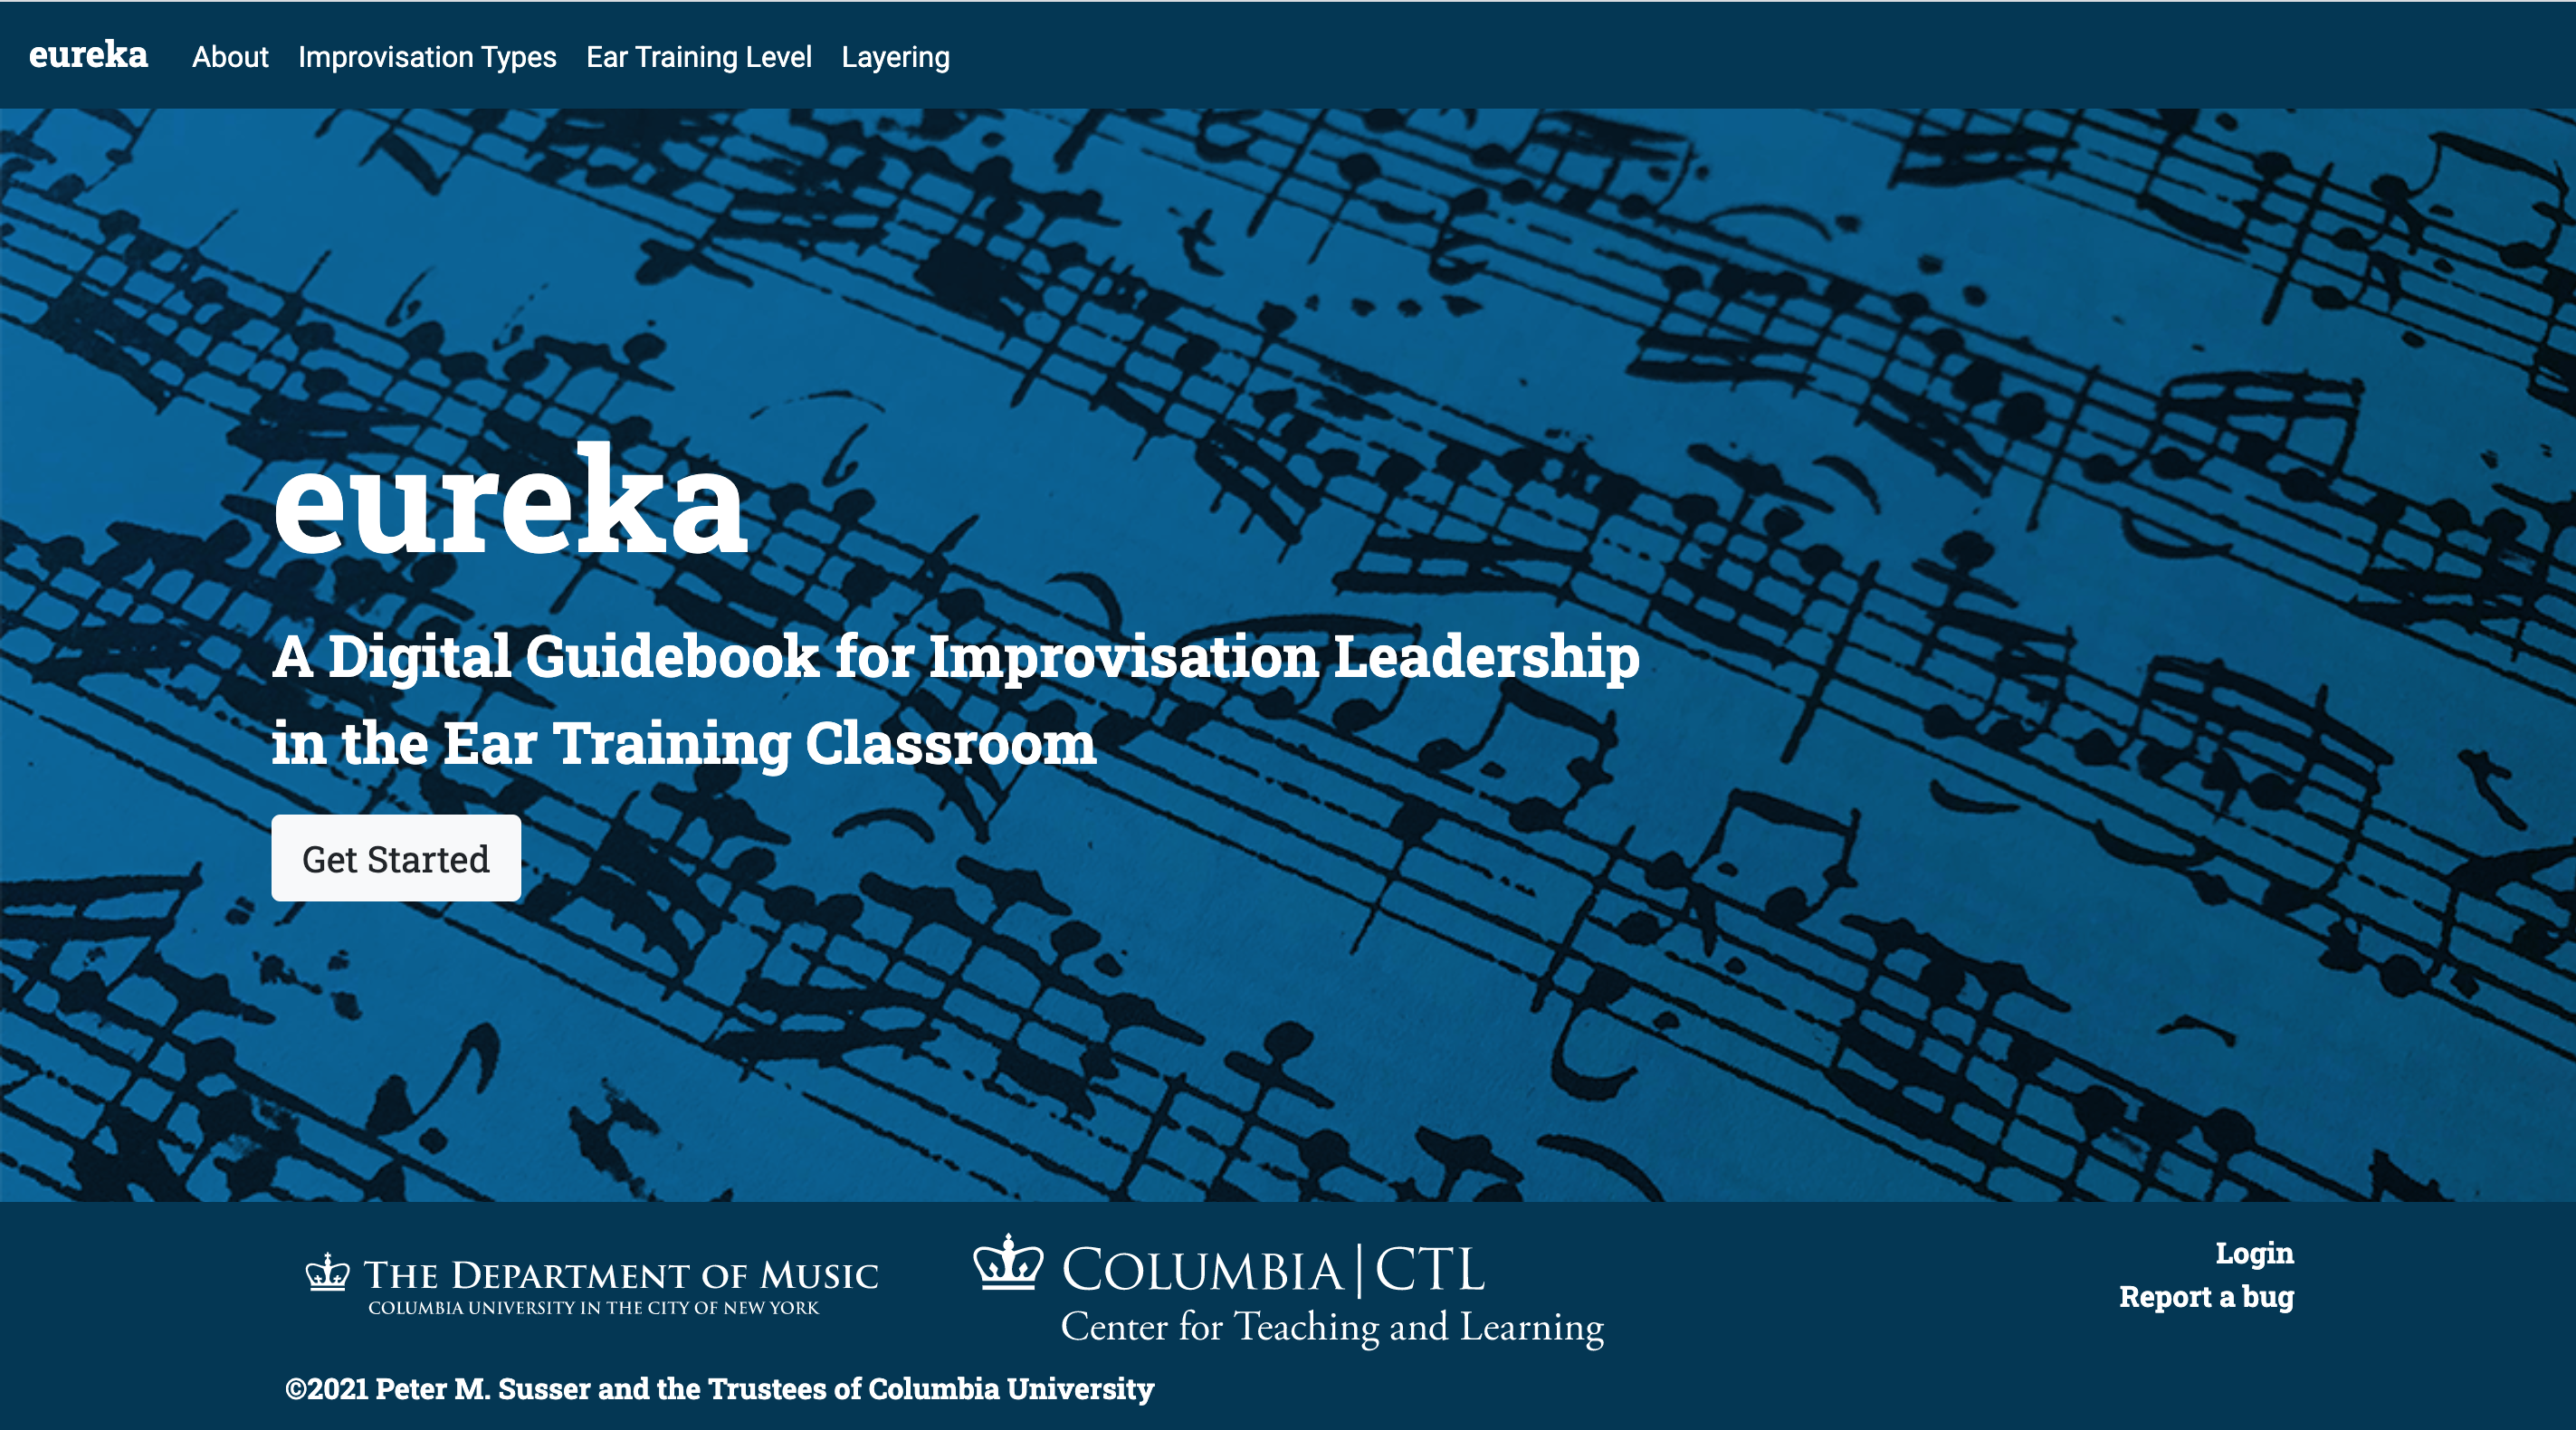 A photo of a Bach cello suite provided the perfect cover image for Eureka's homepage